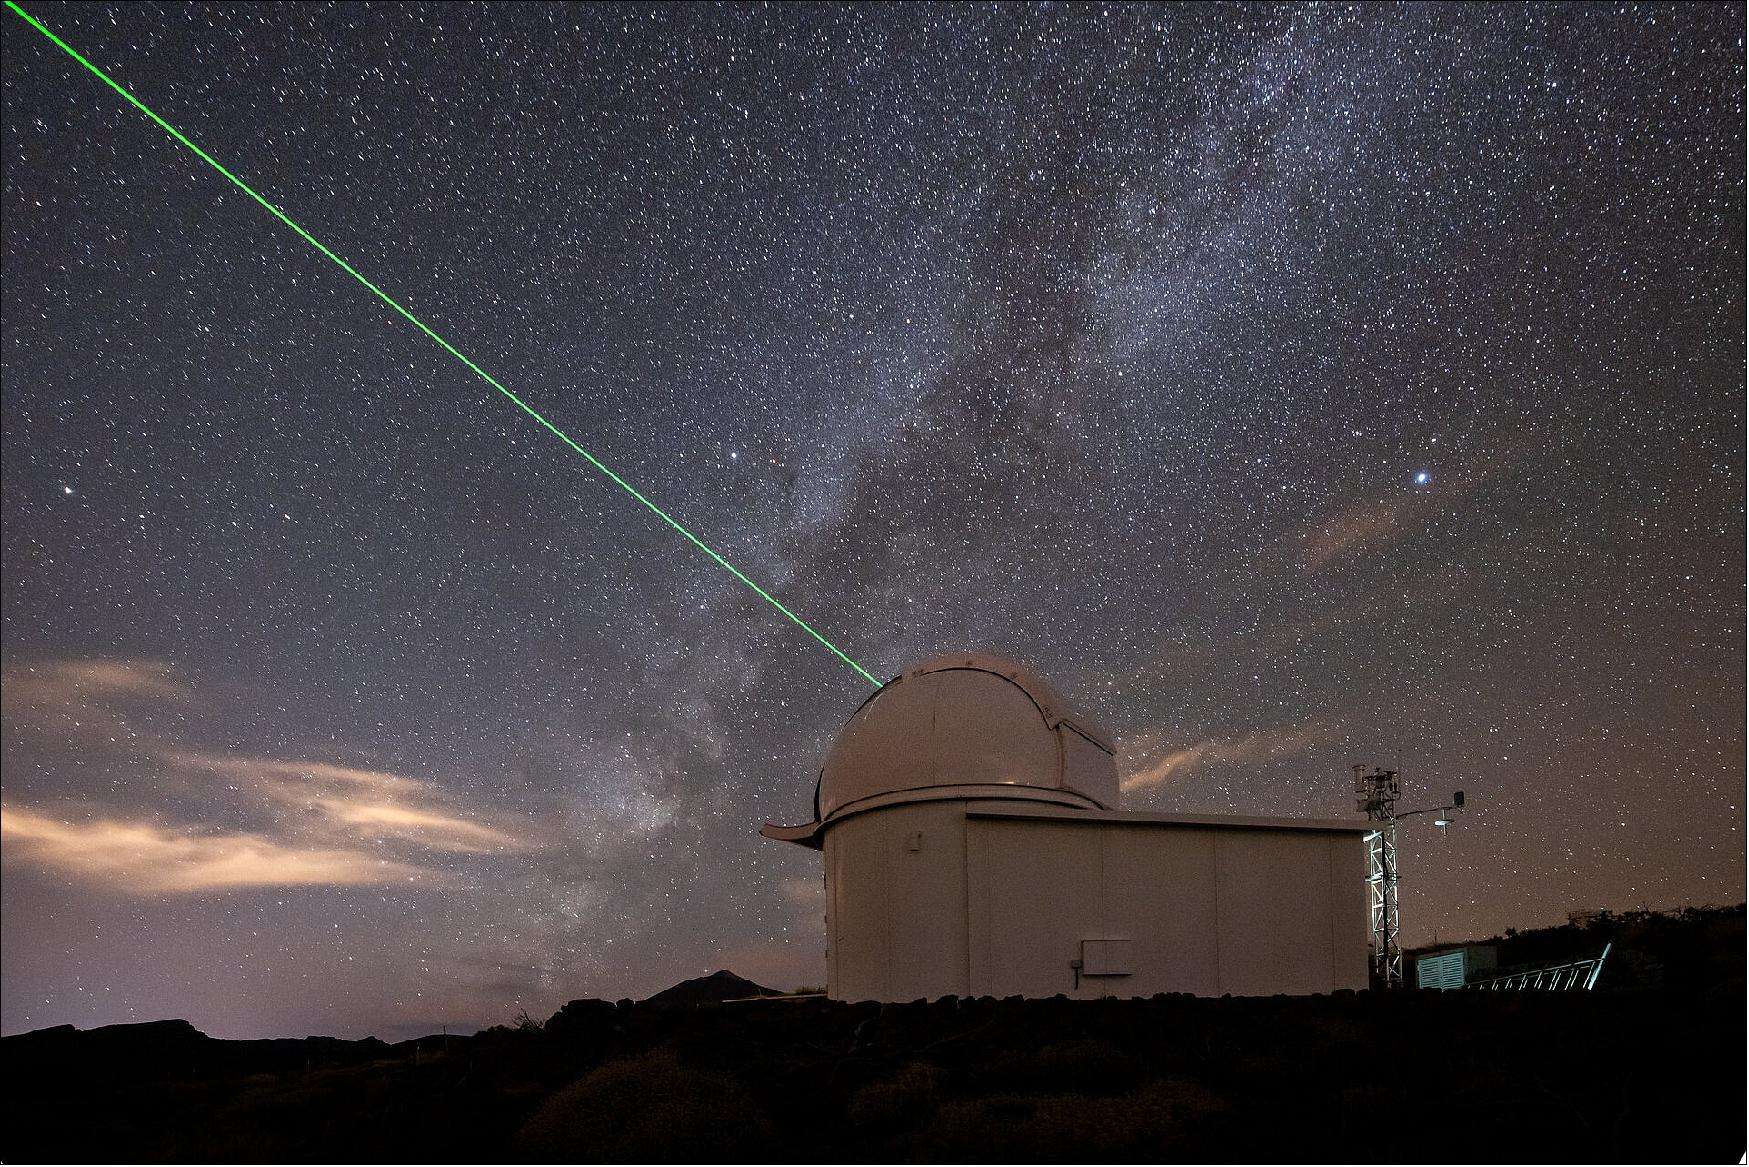 Figure 10: ESA's laser ranging station in Tenerife aims its green laser to the sky. ESA's IZN-1 laser ranging station on top of the Izaña mountain in Tenerife, Spain, has recently undergone months of testing and commissioning, passing its final tests with flying colours. As it reached ‘station acceptance’, it was handed over to ESA from the German company contracted to build it, DiGOS. The station is a technology test bed and a vital first step in making debris mitigation widely accessible to all space actors with a say in the future of our space environment. - IZN-1, developed and now operated by ESA is a test-bed for future technologies and was installed in mid-2021 at the Teide Observatory. The station, telescope and laser have undergone months of testing and commissioning and since July last year have aimed the laser beam of concentrated green light to the sky to actively detect, track and observe active satellites. - Currently, the laser light operates at 150mW but it will soon be upgraded to also track space debris on the basis of much more powerful infrared lasers with an average power of 50 W - .Currently, only satellites fitted with ‘retroreflectors’ can be tracked from ESA’s Izaña station, making up just a proportion of the total population,” explains Clemens Heese, Head of the Optical Technologies Section. - “The station will be upgraded in the next couple of years, enabling it to perform the same vital ‘ranging’ services with uncooperative targets – vitally, debris objects and older satellites fitted without retroreflecting patches.” (image credit: ESA)